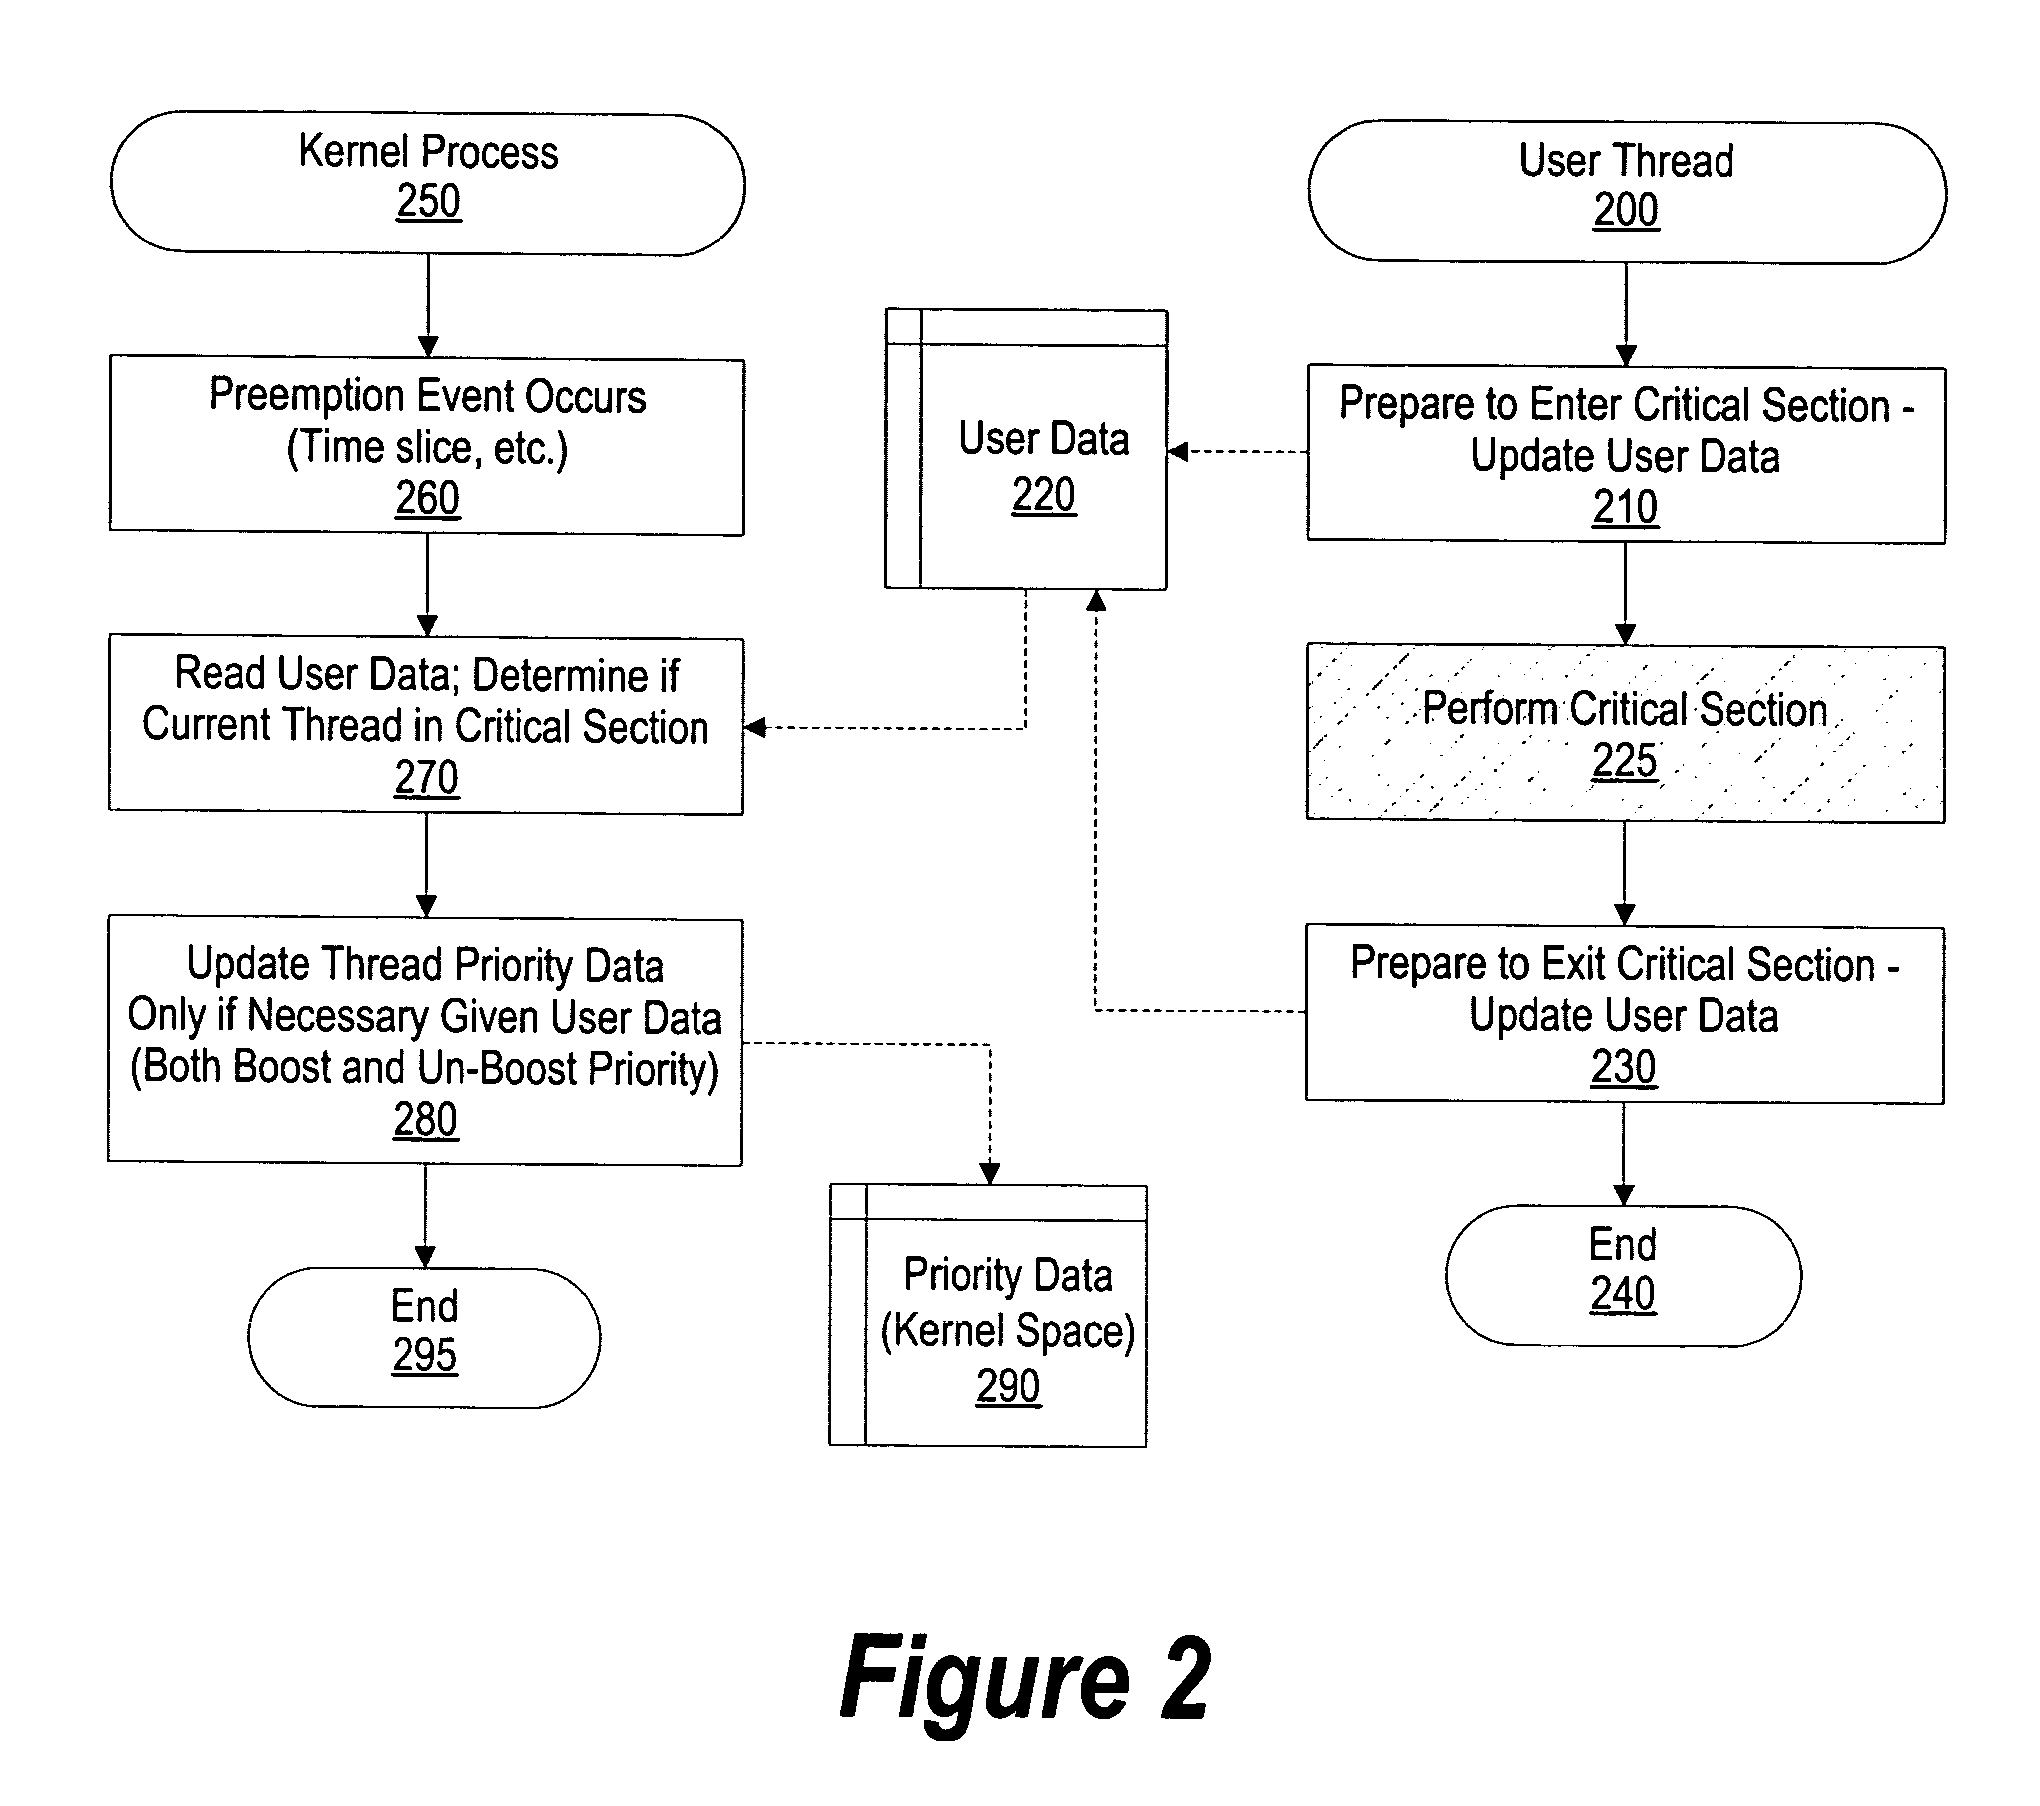 System and method for delayed priority boost